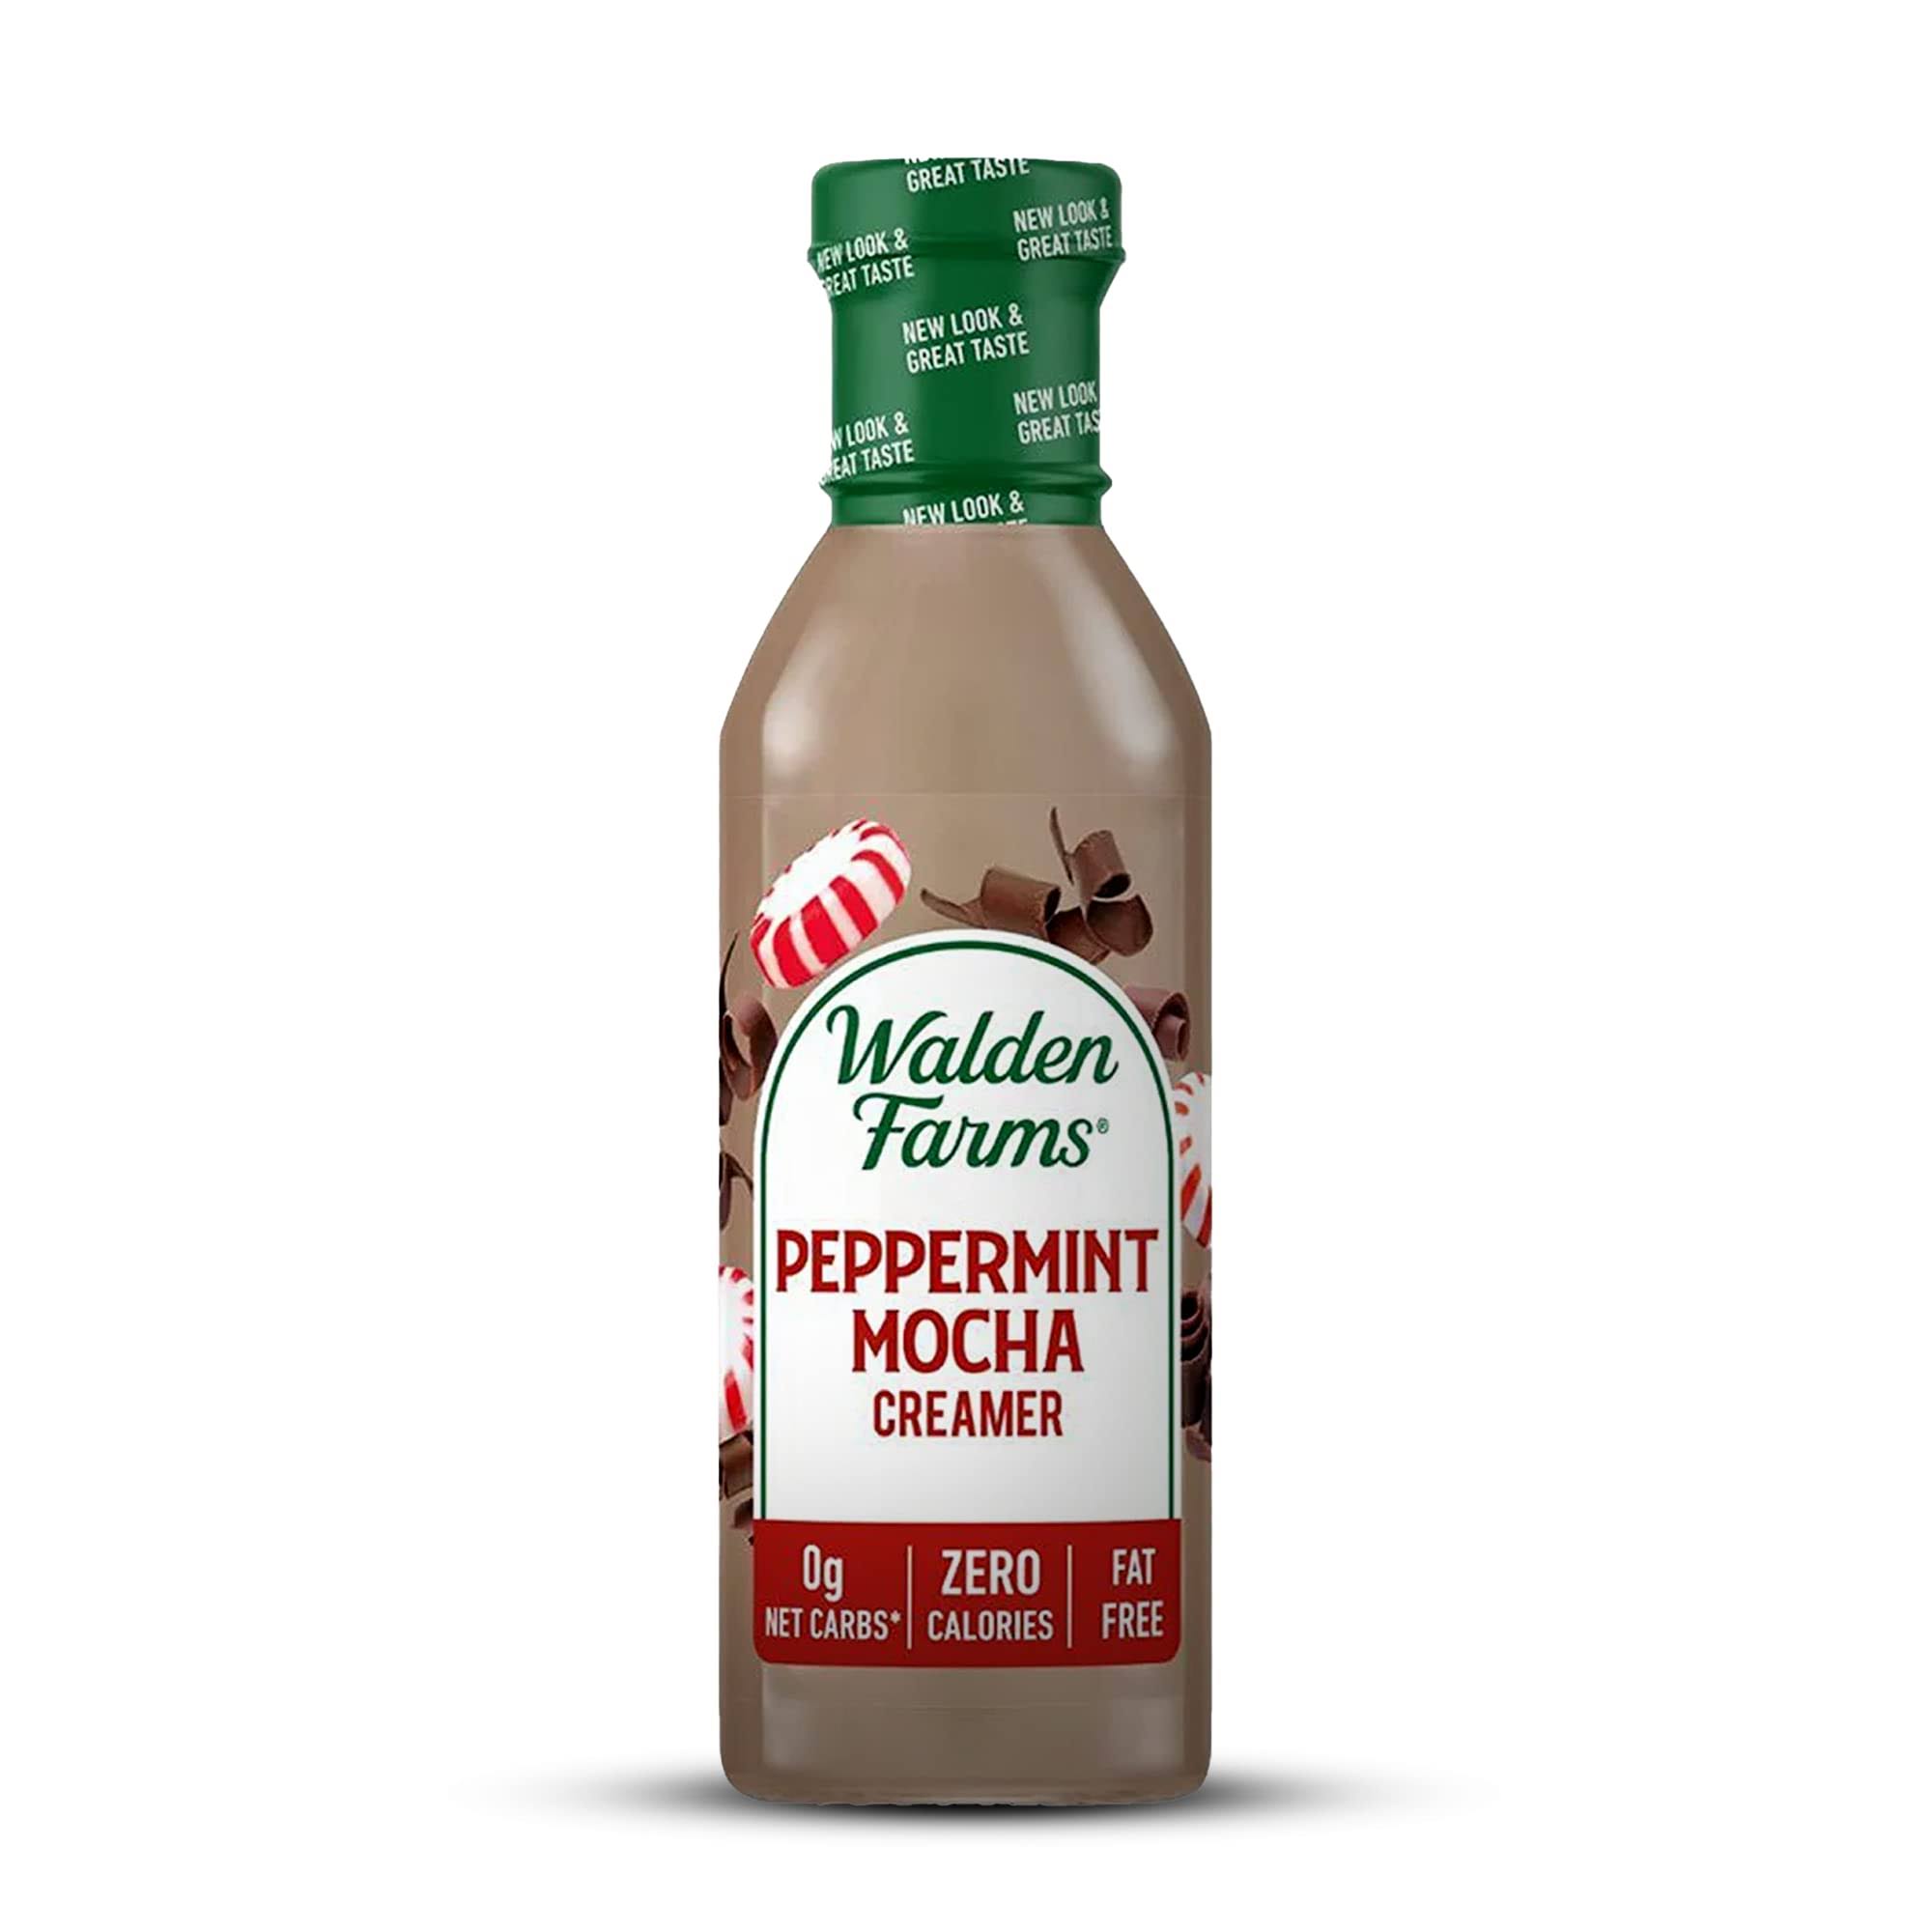 Walden Farms Peppermint Mocha Coffee Creamer 12 Oz Bottle - Fresh And Flavorful, Vegan, Paleo And Keto Friendly, Non-Dairy Milk Substitute, 0g Net